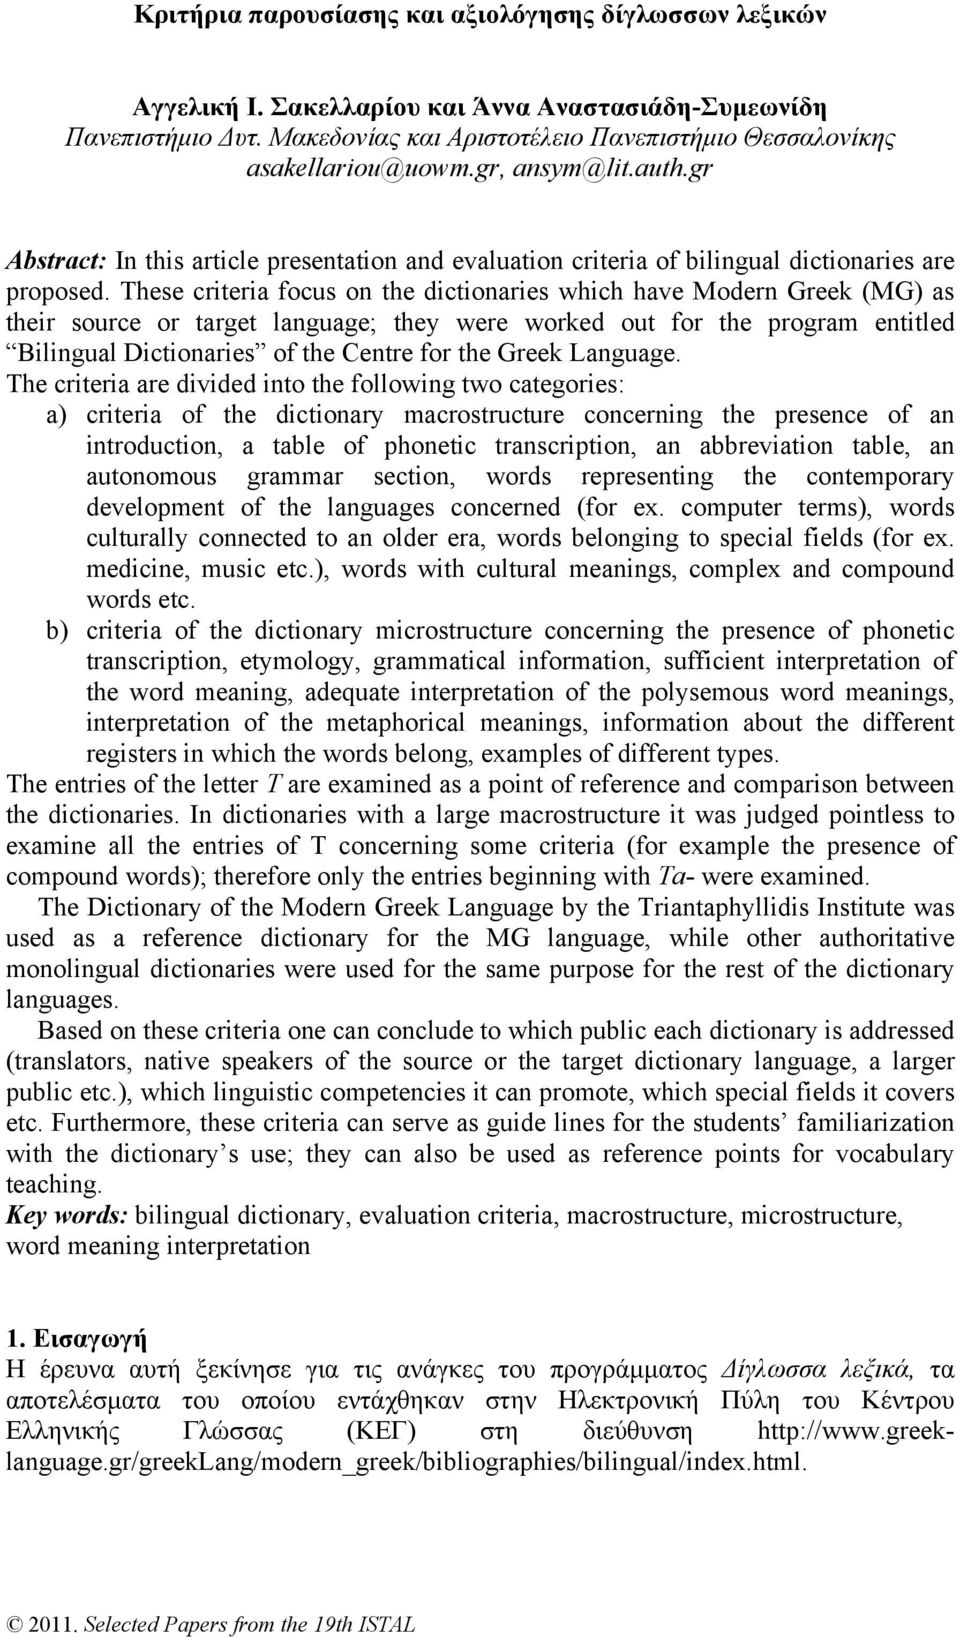 These criteria focus on the dictionaries which have Modern Greek (MG) as their source or target language; they were worked out for the program entitled Bilingual Dictionaries of the Centre for the